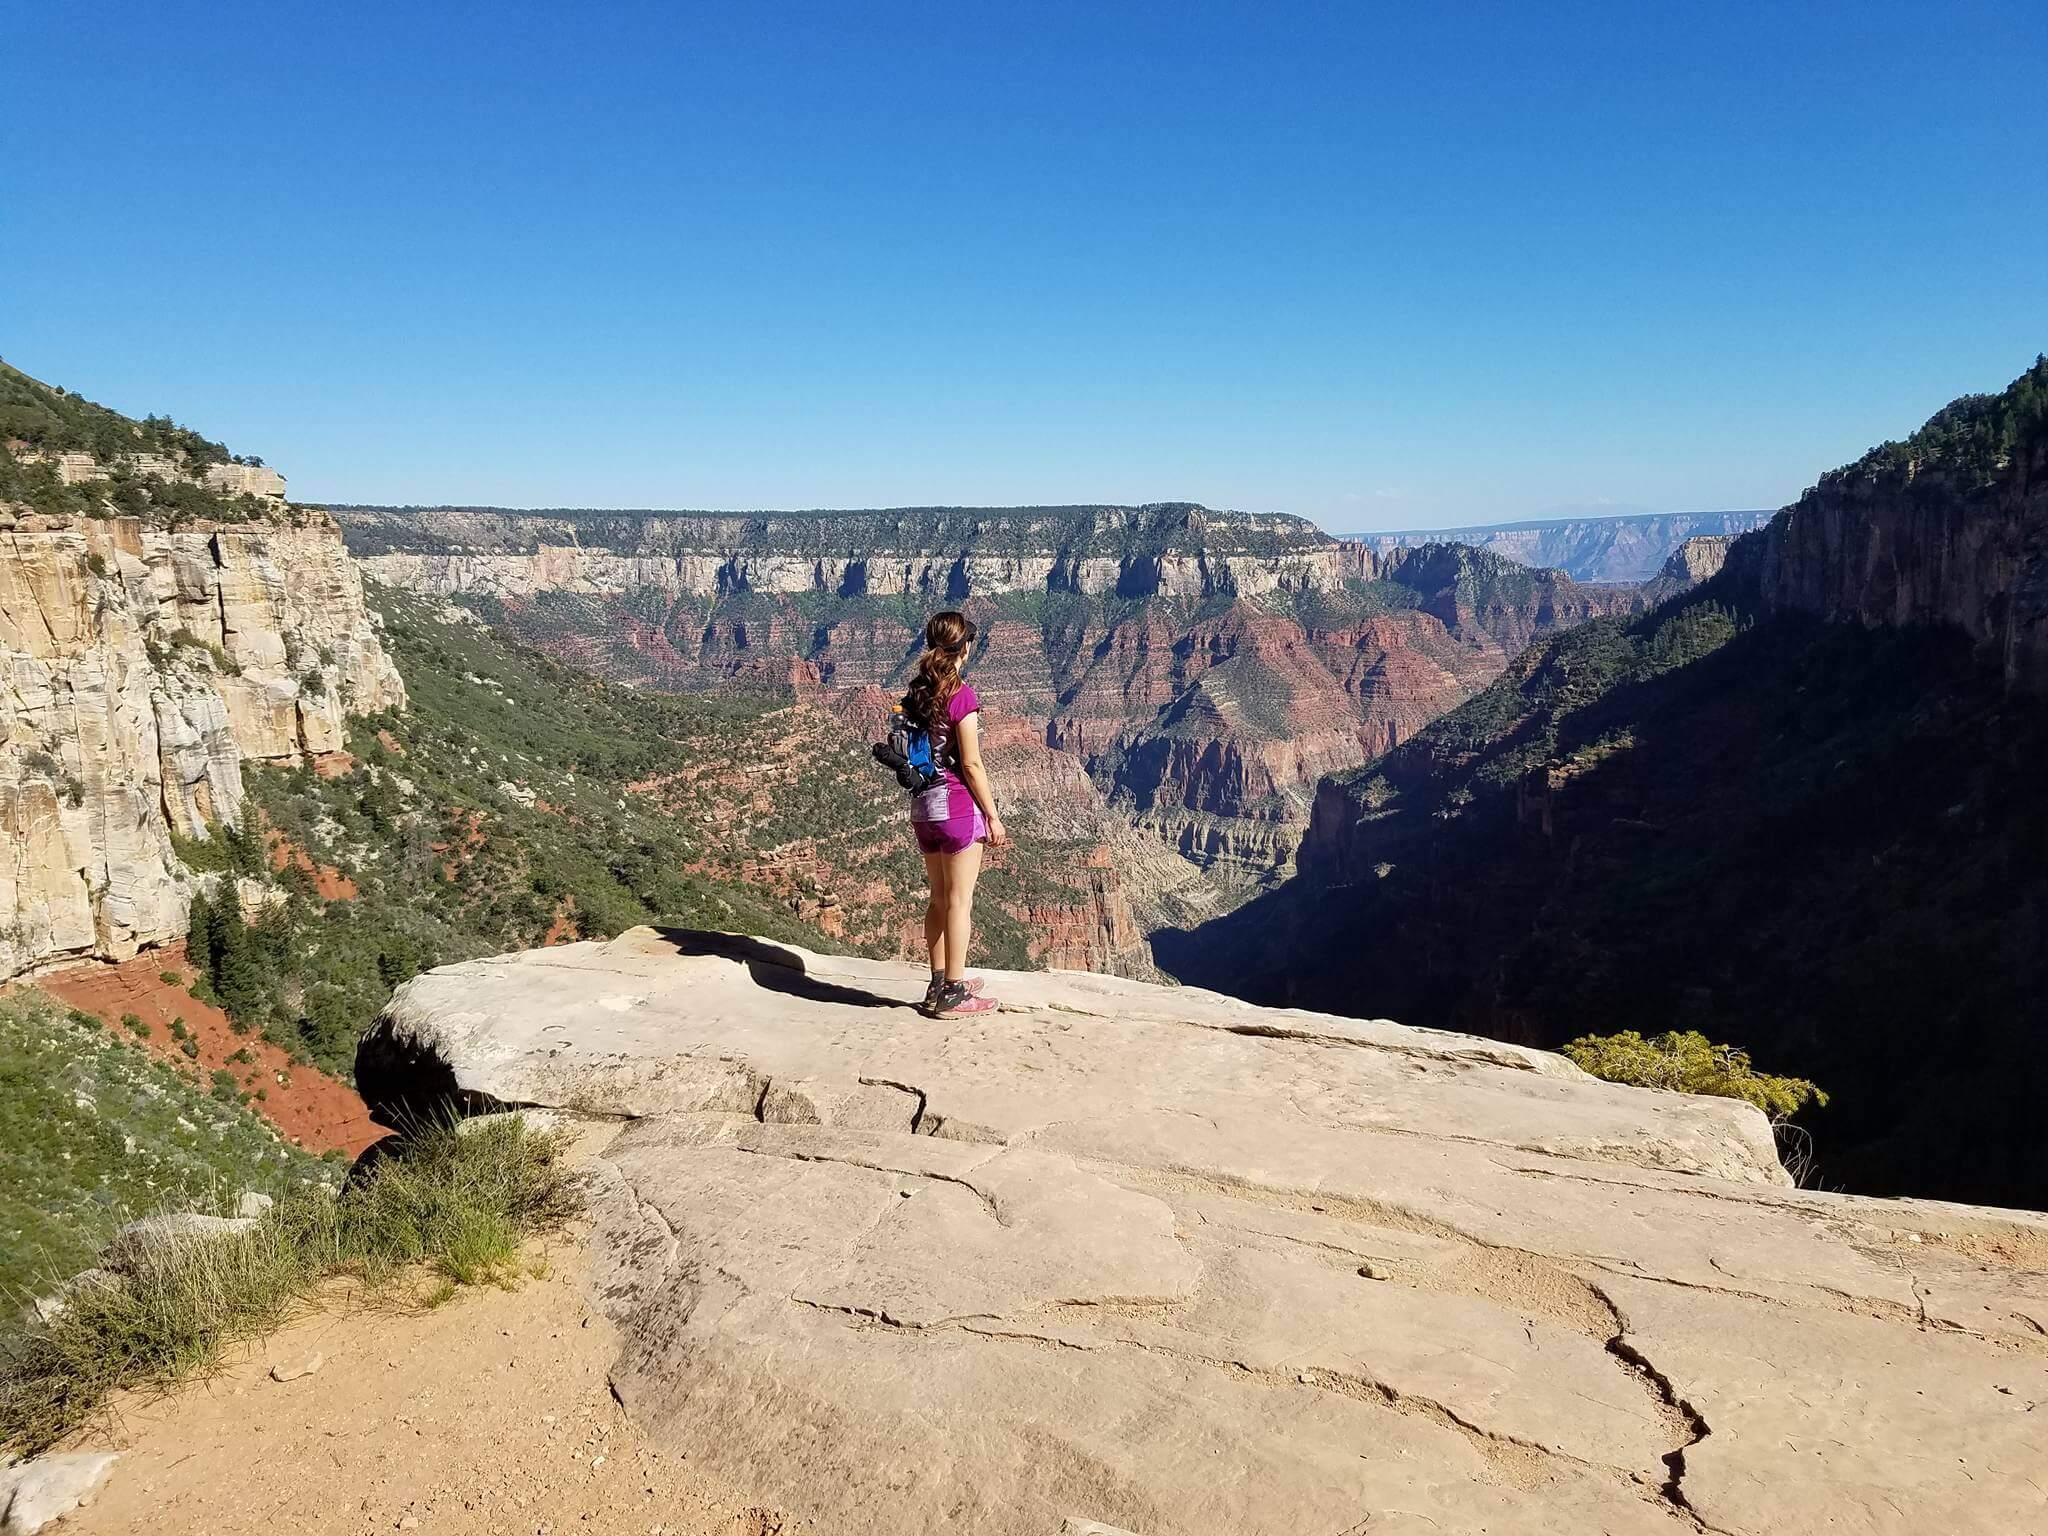 Looking back at what we crossed: The Grand Canyon.